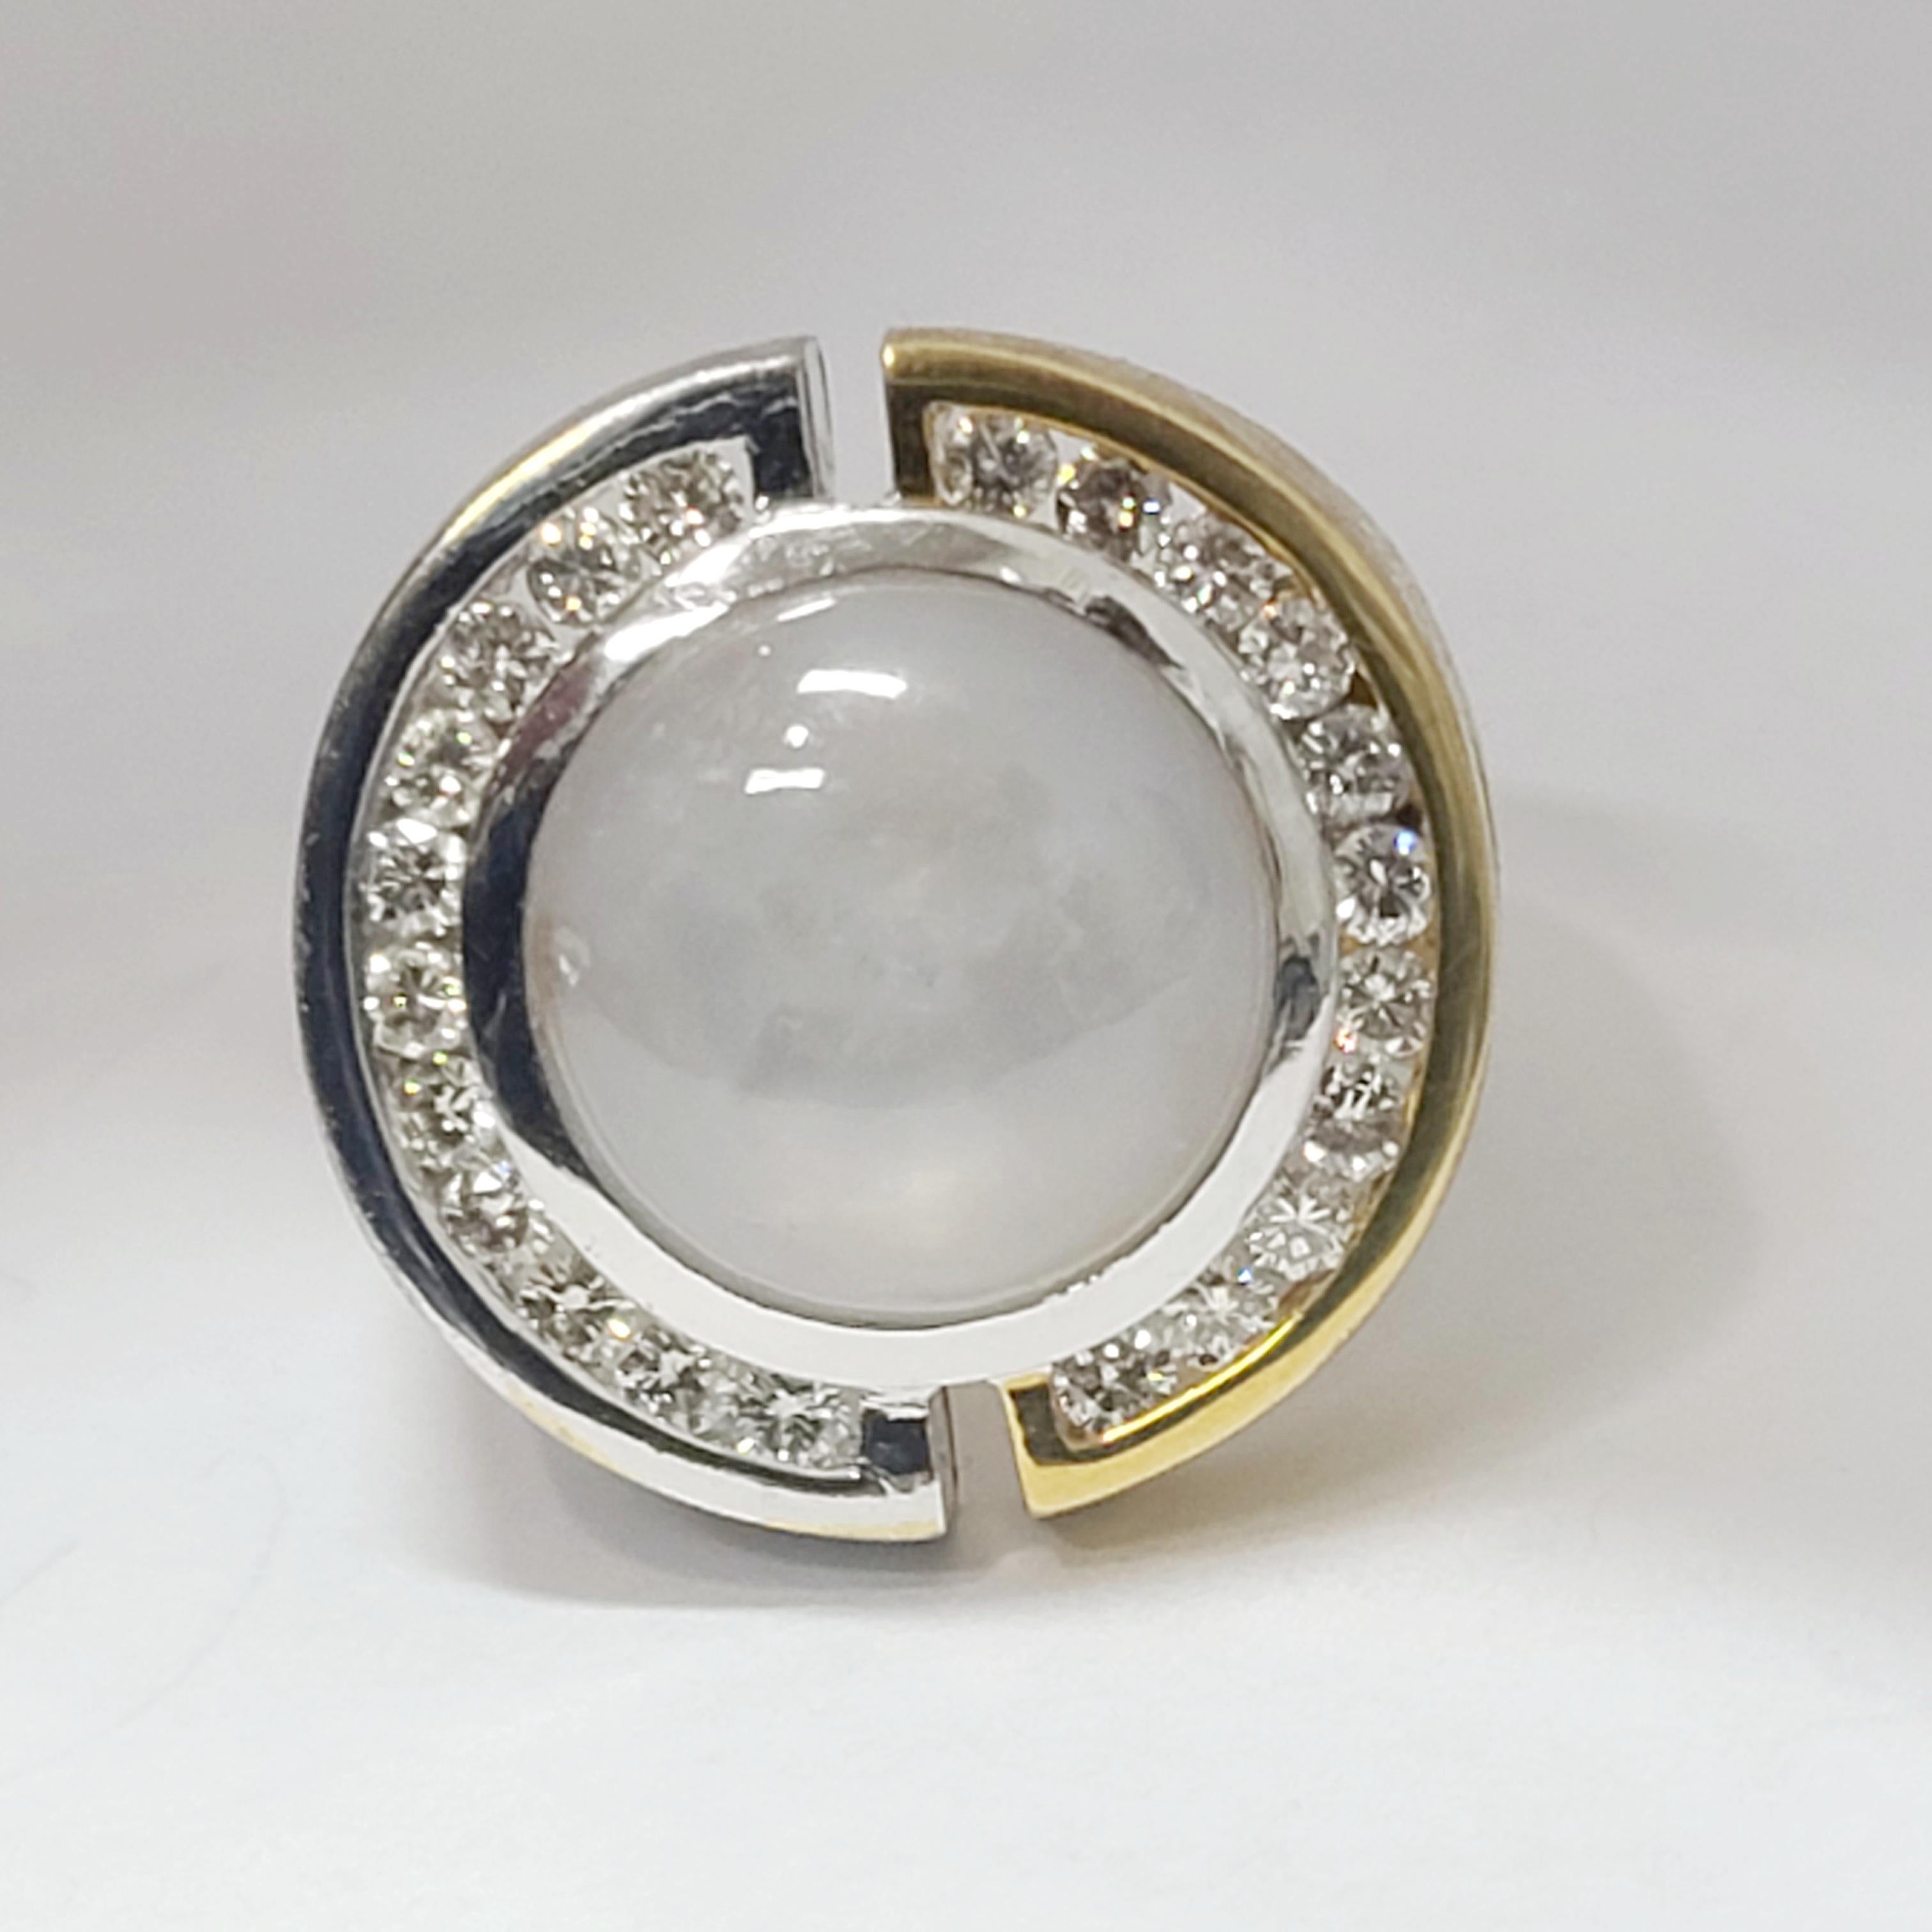 Amazing custom made JAMAR signed 18k folded yellow and white gold having a damascus type wood grain effect to the metal.  It is split down the middle to creat a ying yang type of effect.  The center cabochon is a natural grey star sapphire with a